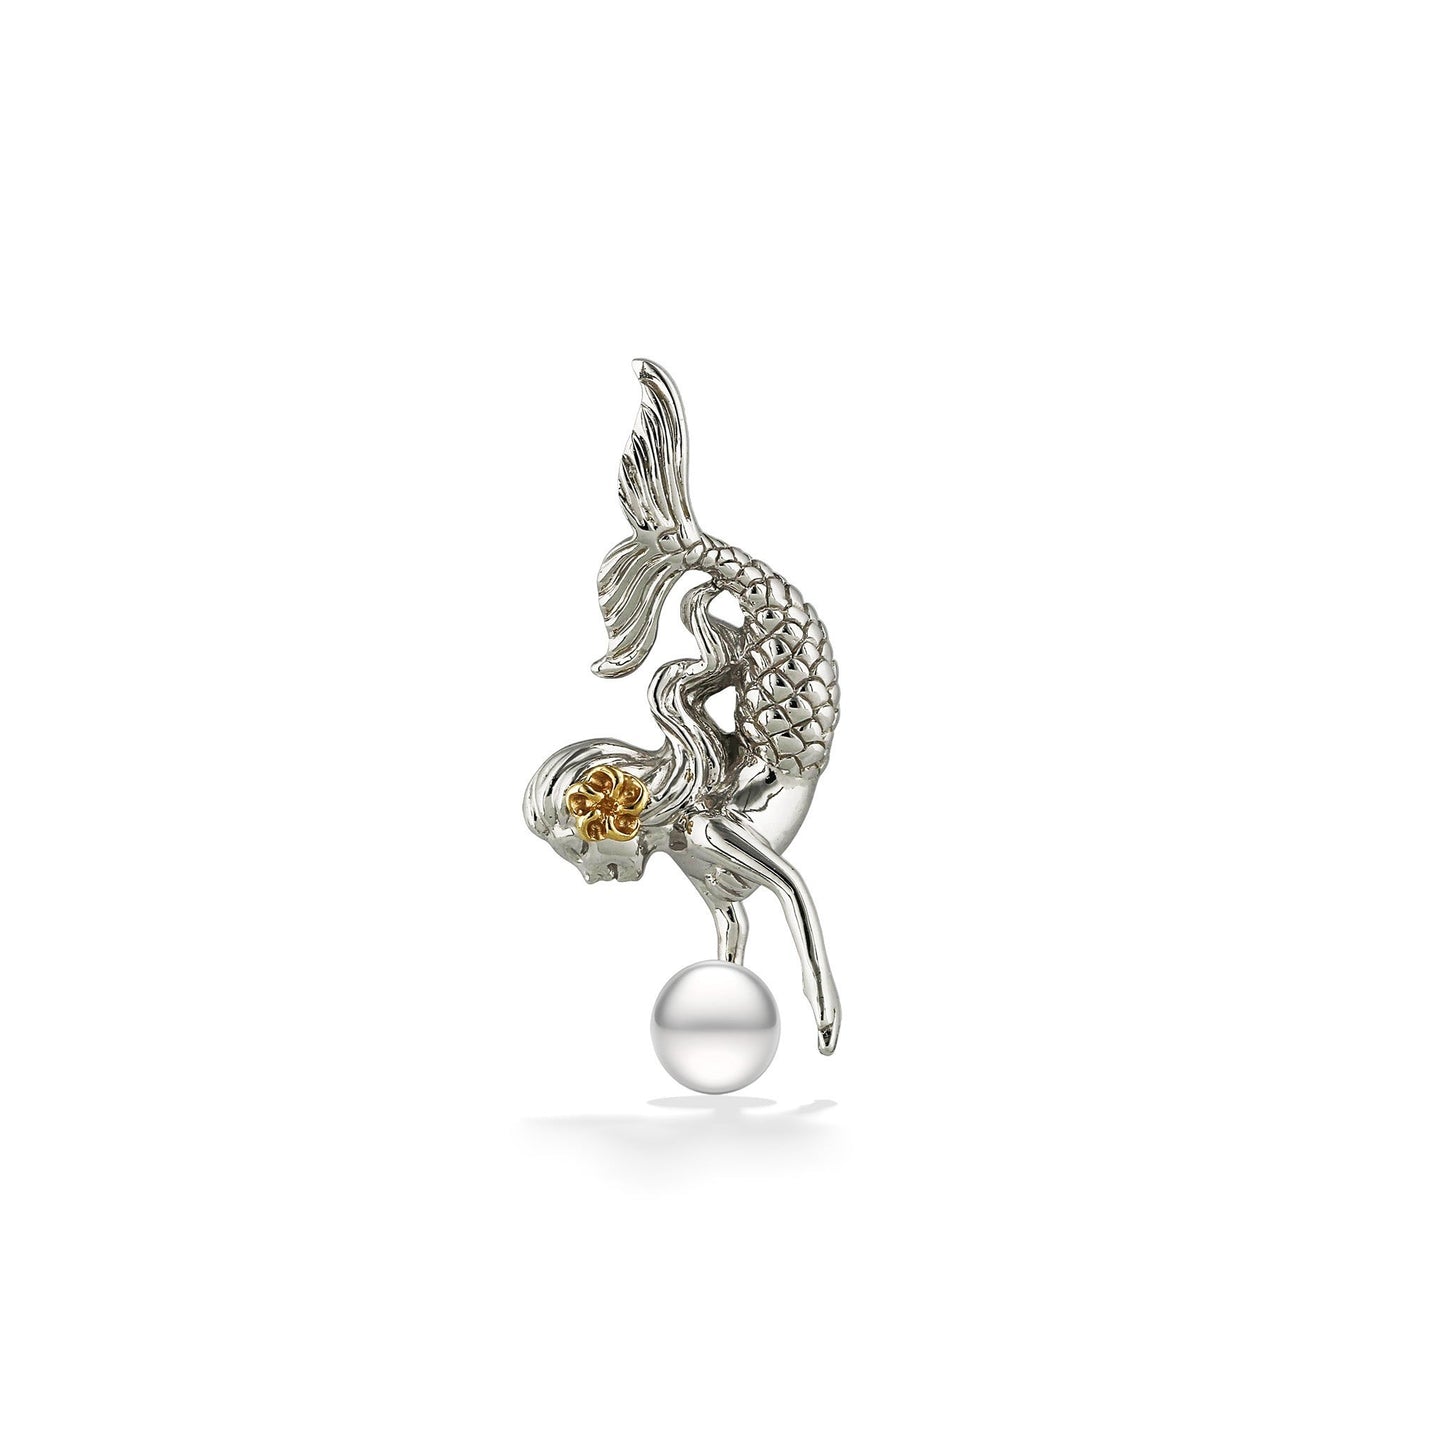 00681 - 14K Yellow Gold and Sterling Silver - Mermaid Pendant